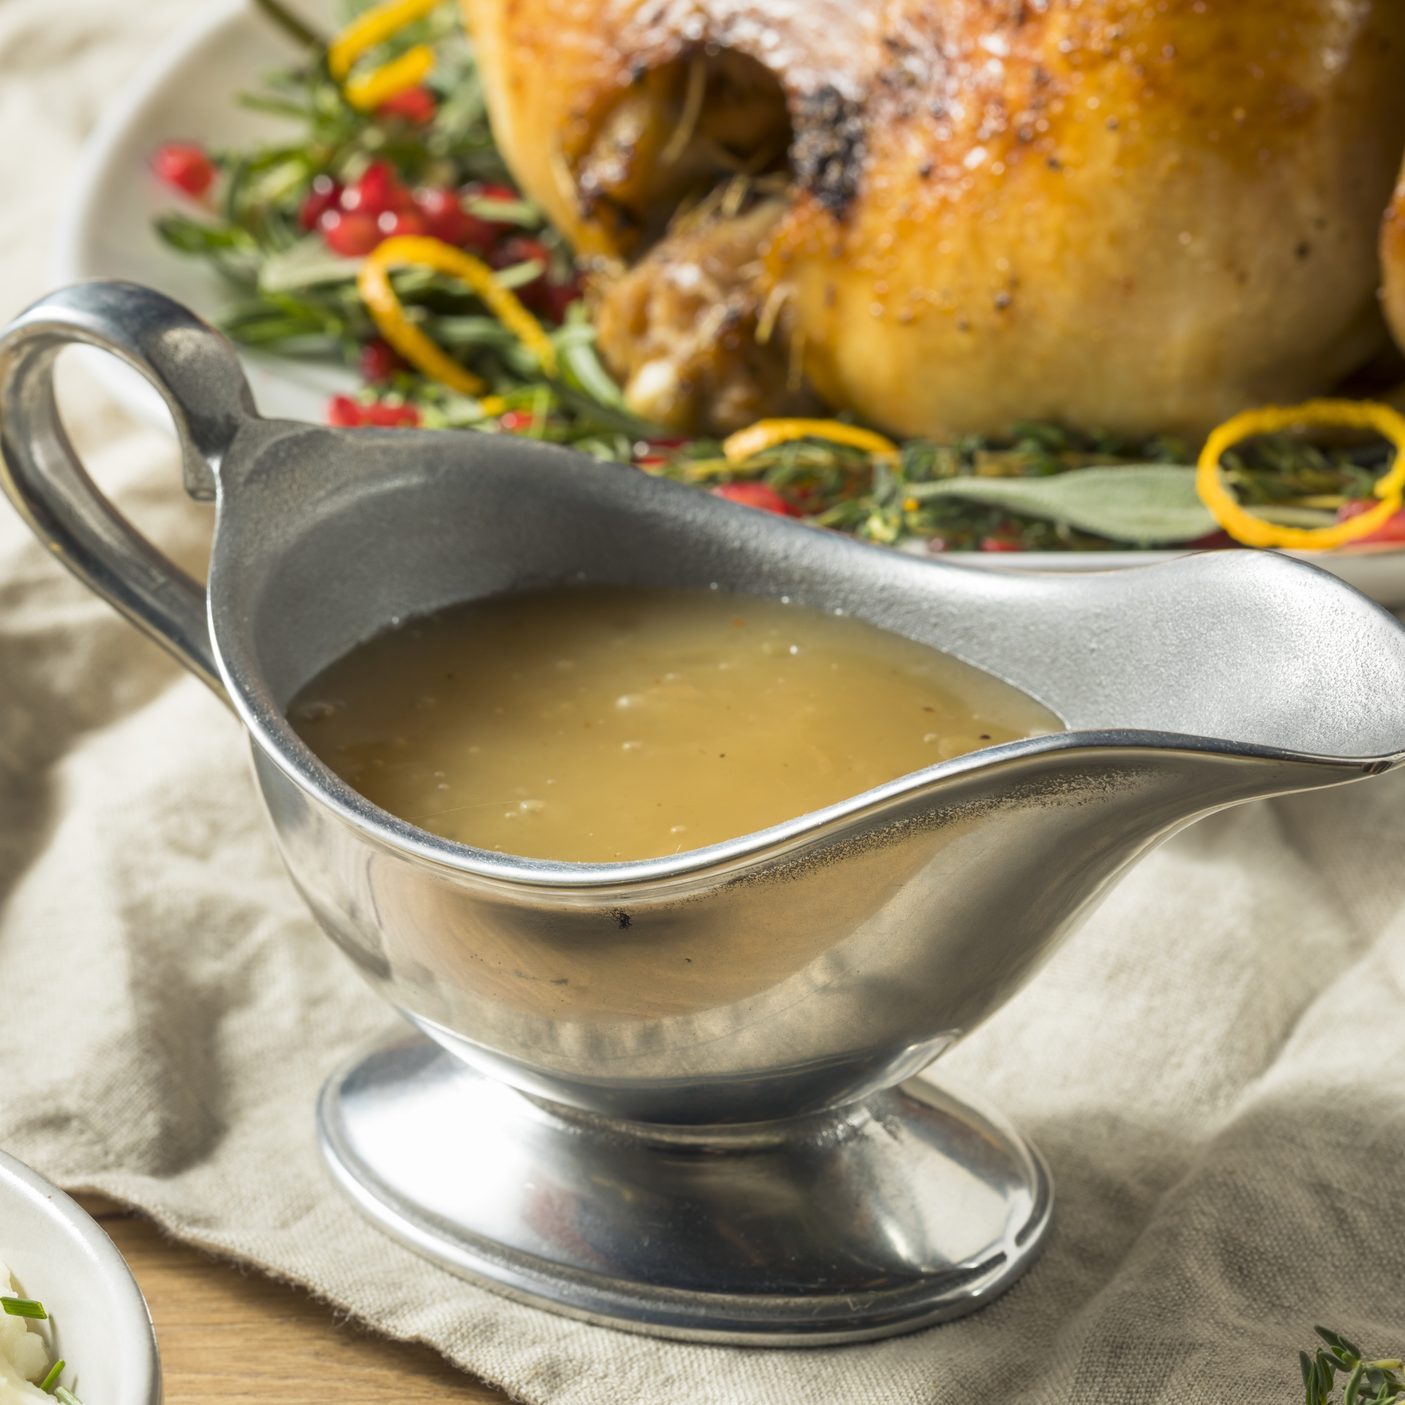 Thankful Gravy Boat with Warming Stand Style Me Pretty